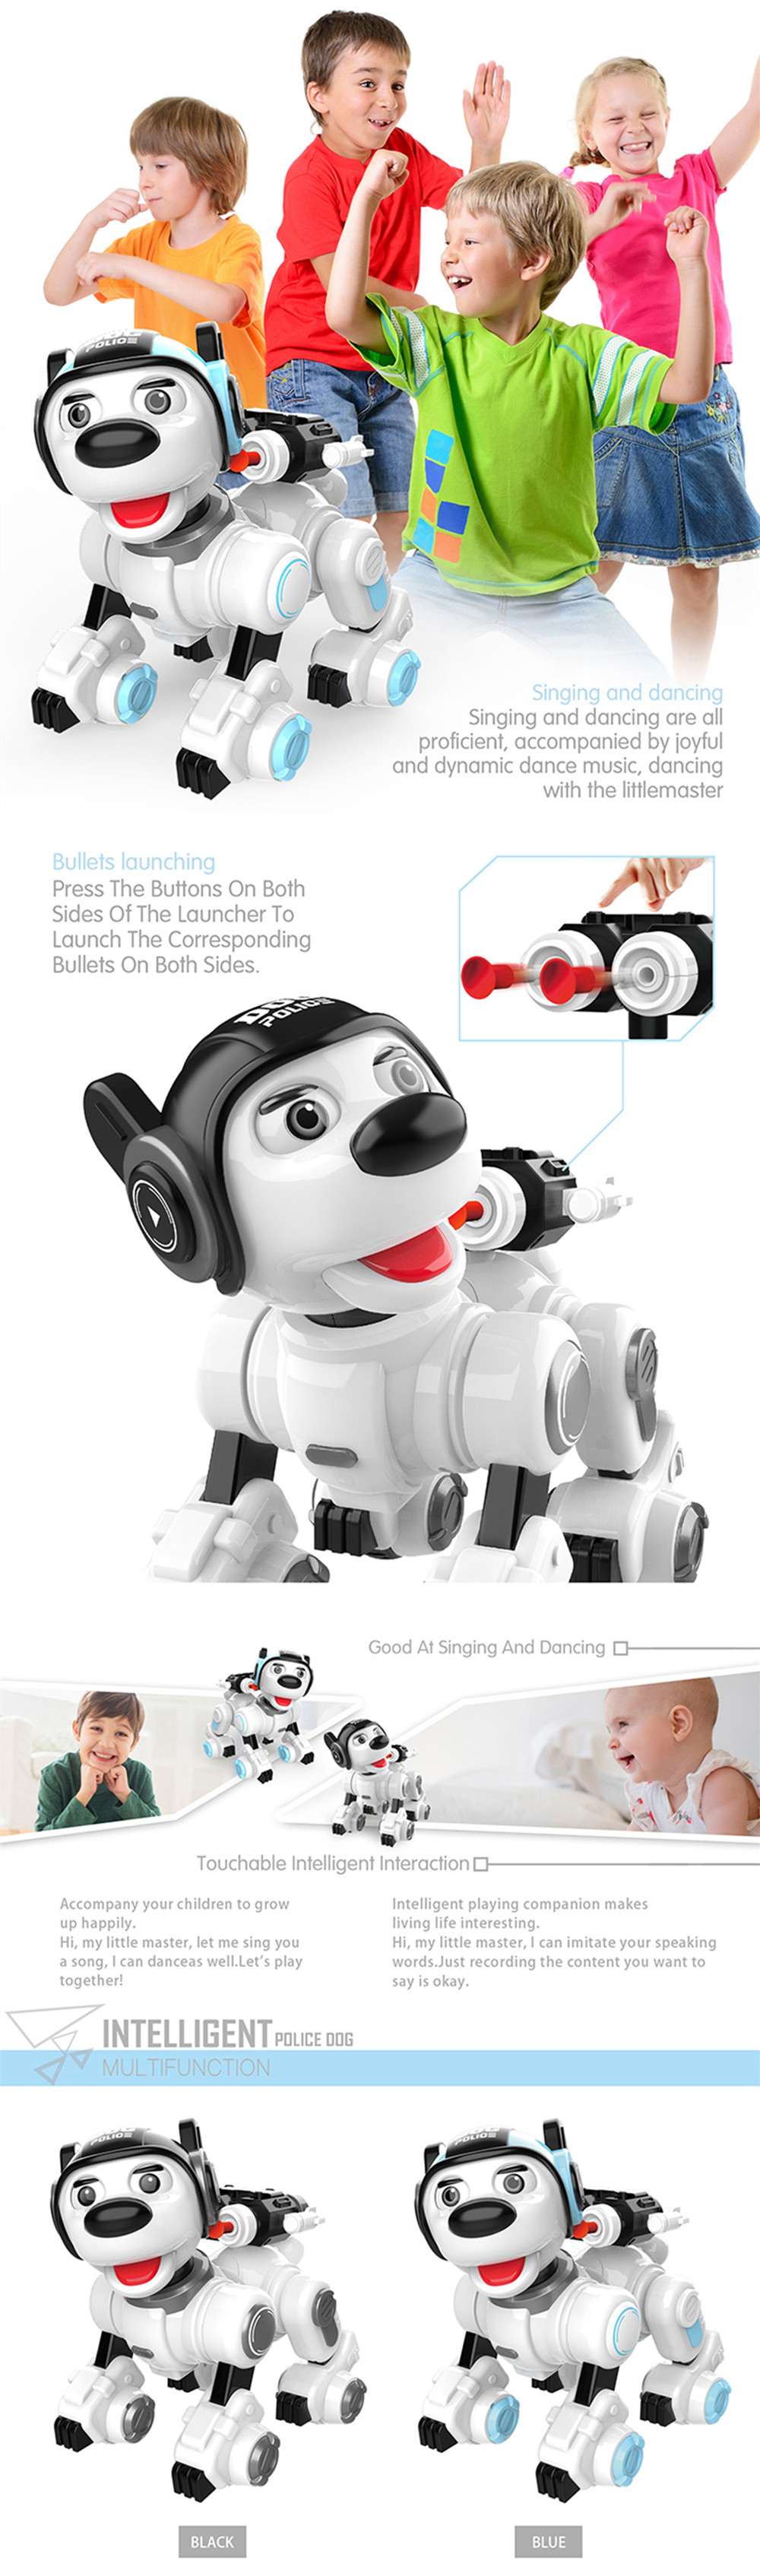 Mofun-1901-Smart-Dog-Programmable-InfraredTouch-Control-Patrol-Dance-Sing-Shooting-RC-Robot-Toy-Gift-1574901-3